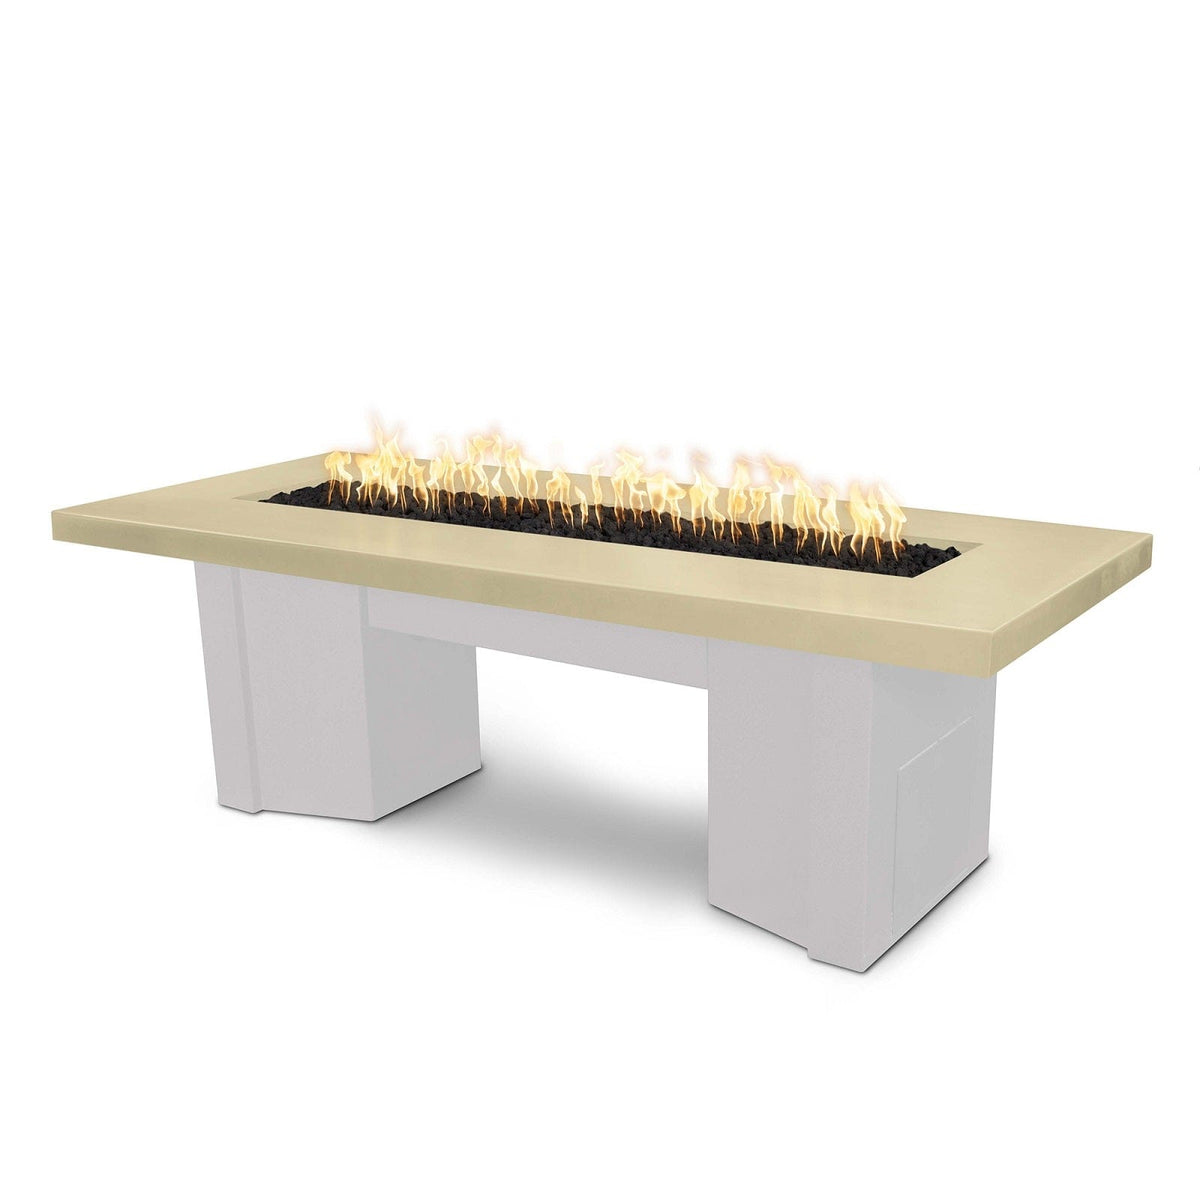 The Outdoor Plus Fire Features Vanilla (-VAN) / White Powder Coated Steel (-WHT) The Outdoor Plus 60&quot; Alameda Fire Table Smooth Concrete in Natural Gas - Flame Sense System with Push Button Spark Igniter / OPT-ALMGFRC60FSEN-NG